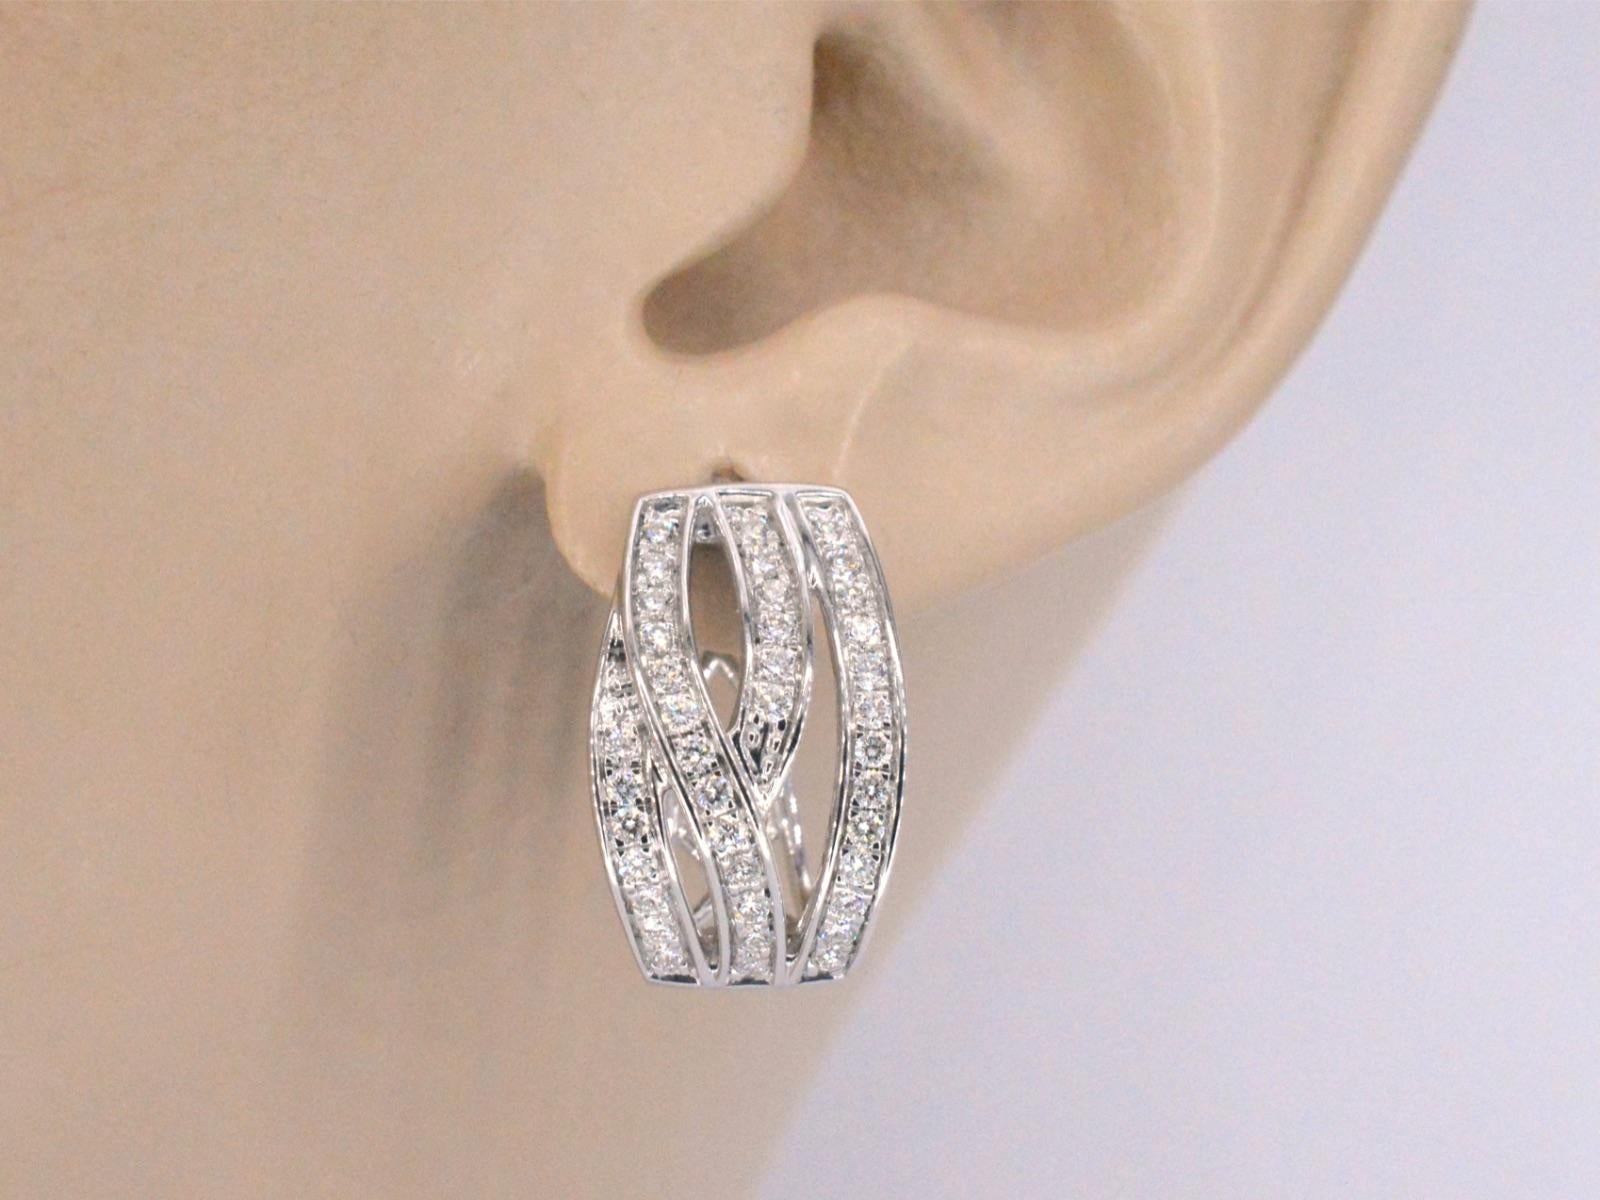 These white gold earrings are a stunning piece of jewelry that features brilliant-cut diamonds in a unique and modern design. The diamonds are expertly set in the white gold to create a seamless and sophisticated look that is perfect for any